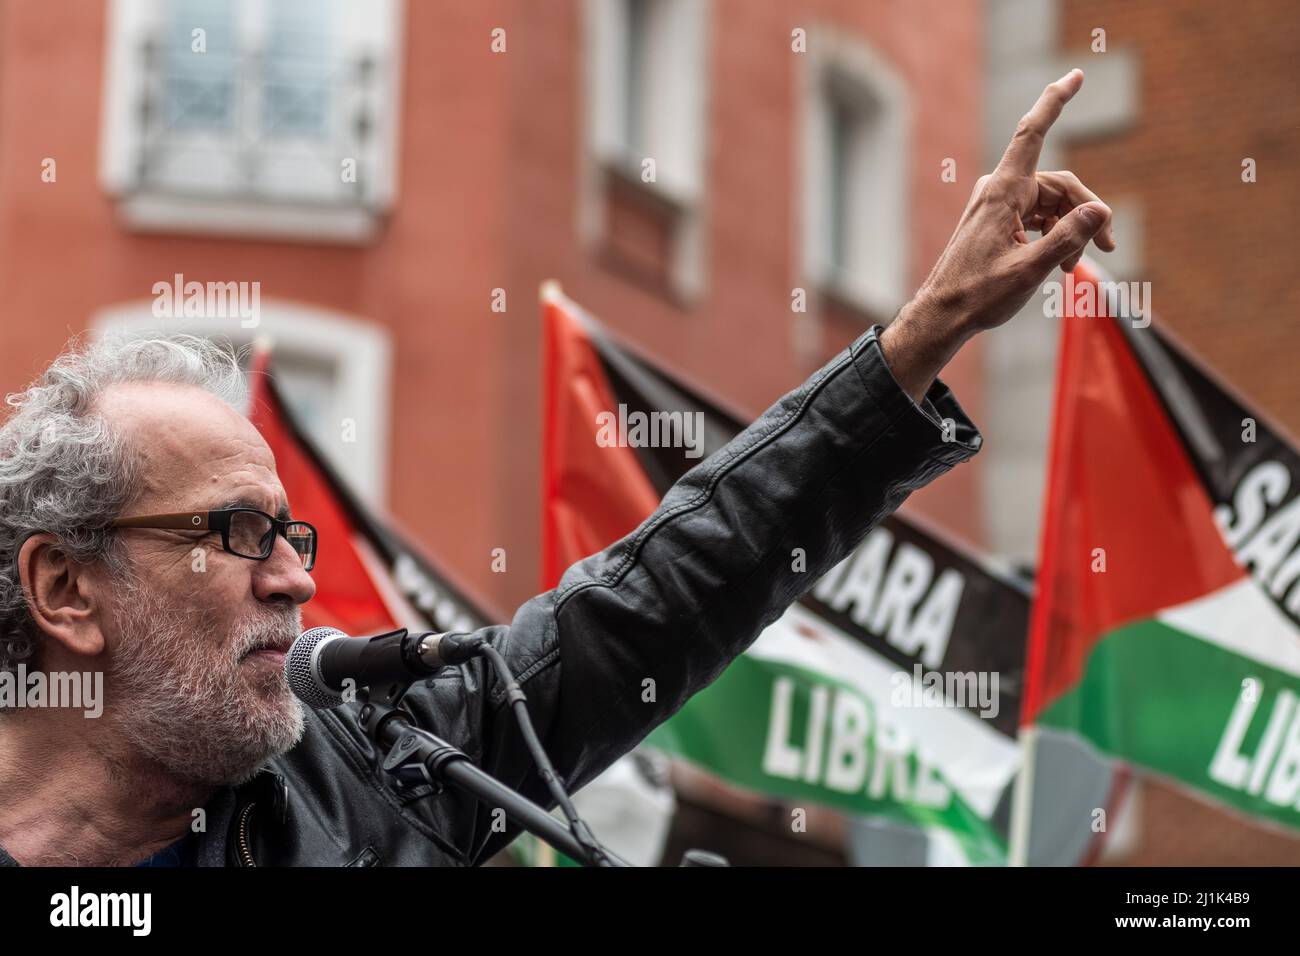 Madrid, Spain. 26th Mar, 2022. Spanish actor Guillermo Toledo speaks giving support to the Saharawi community during a demonstration in front of the Ministry of Foreign Affairs. Thousands have gathered to protest against the Spanish government's support for Morocco's autonomy plan for Western Sahara, which grants a limited autonomy to Western Sahara. Pro-independence groups as well as Algeria oppose the proposal. Credit: Marcos del Mazo/Alamy Live News Stock Photo